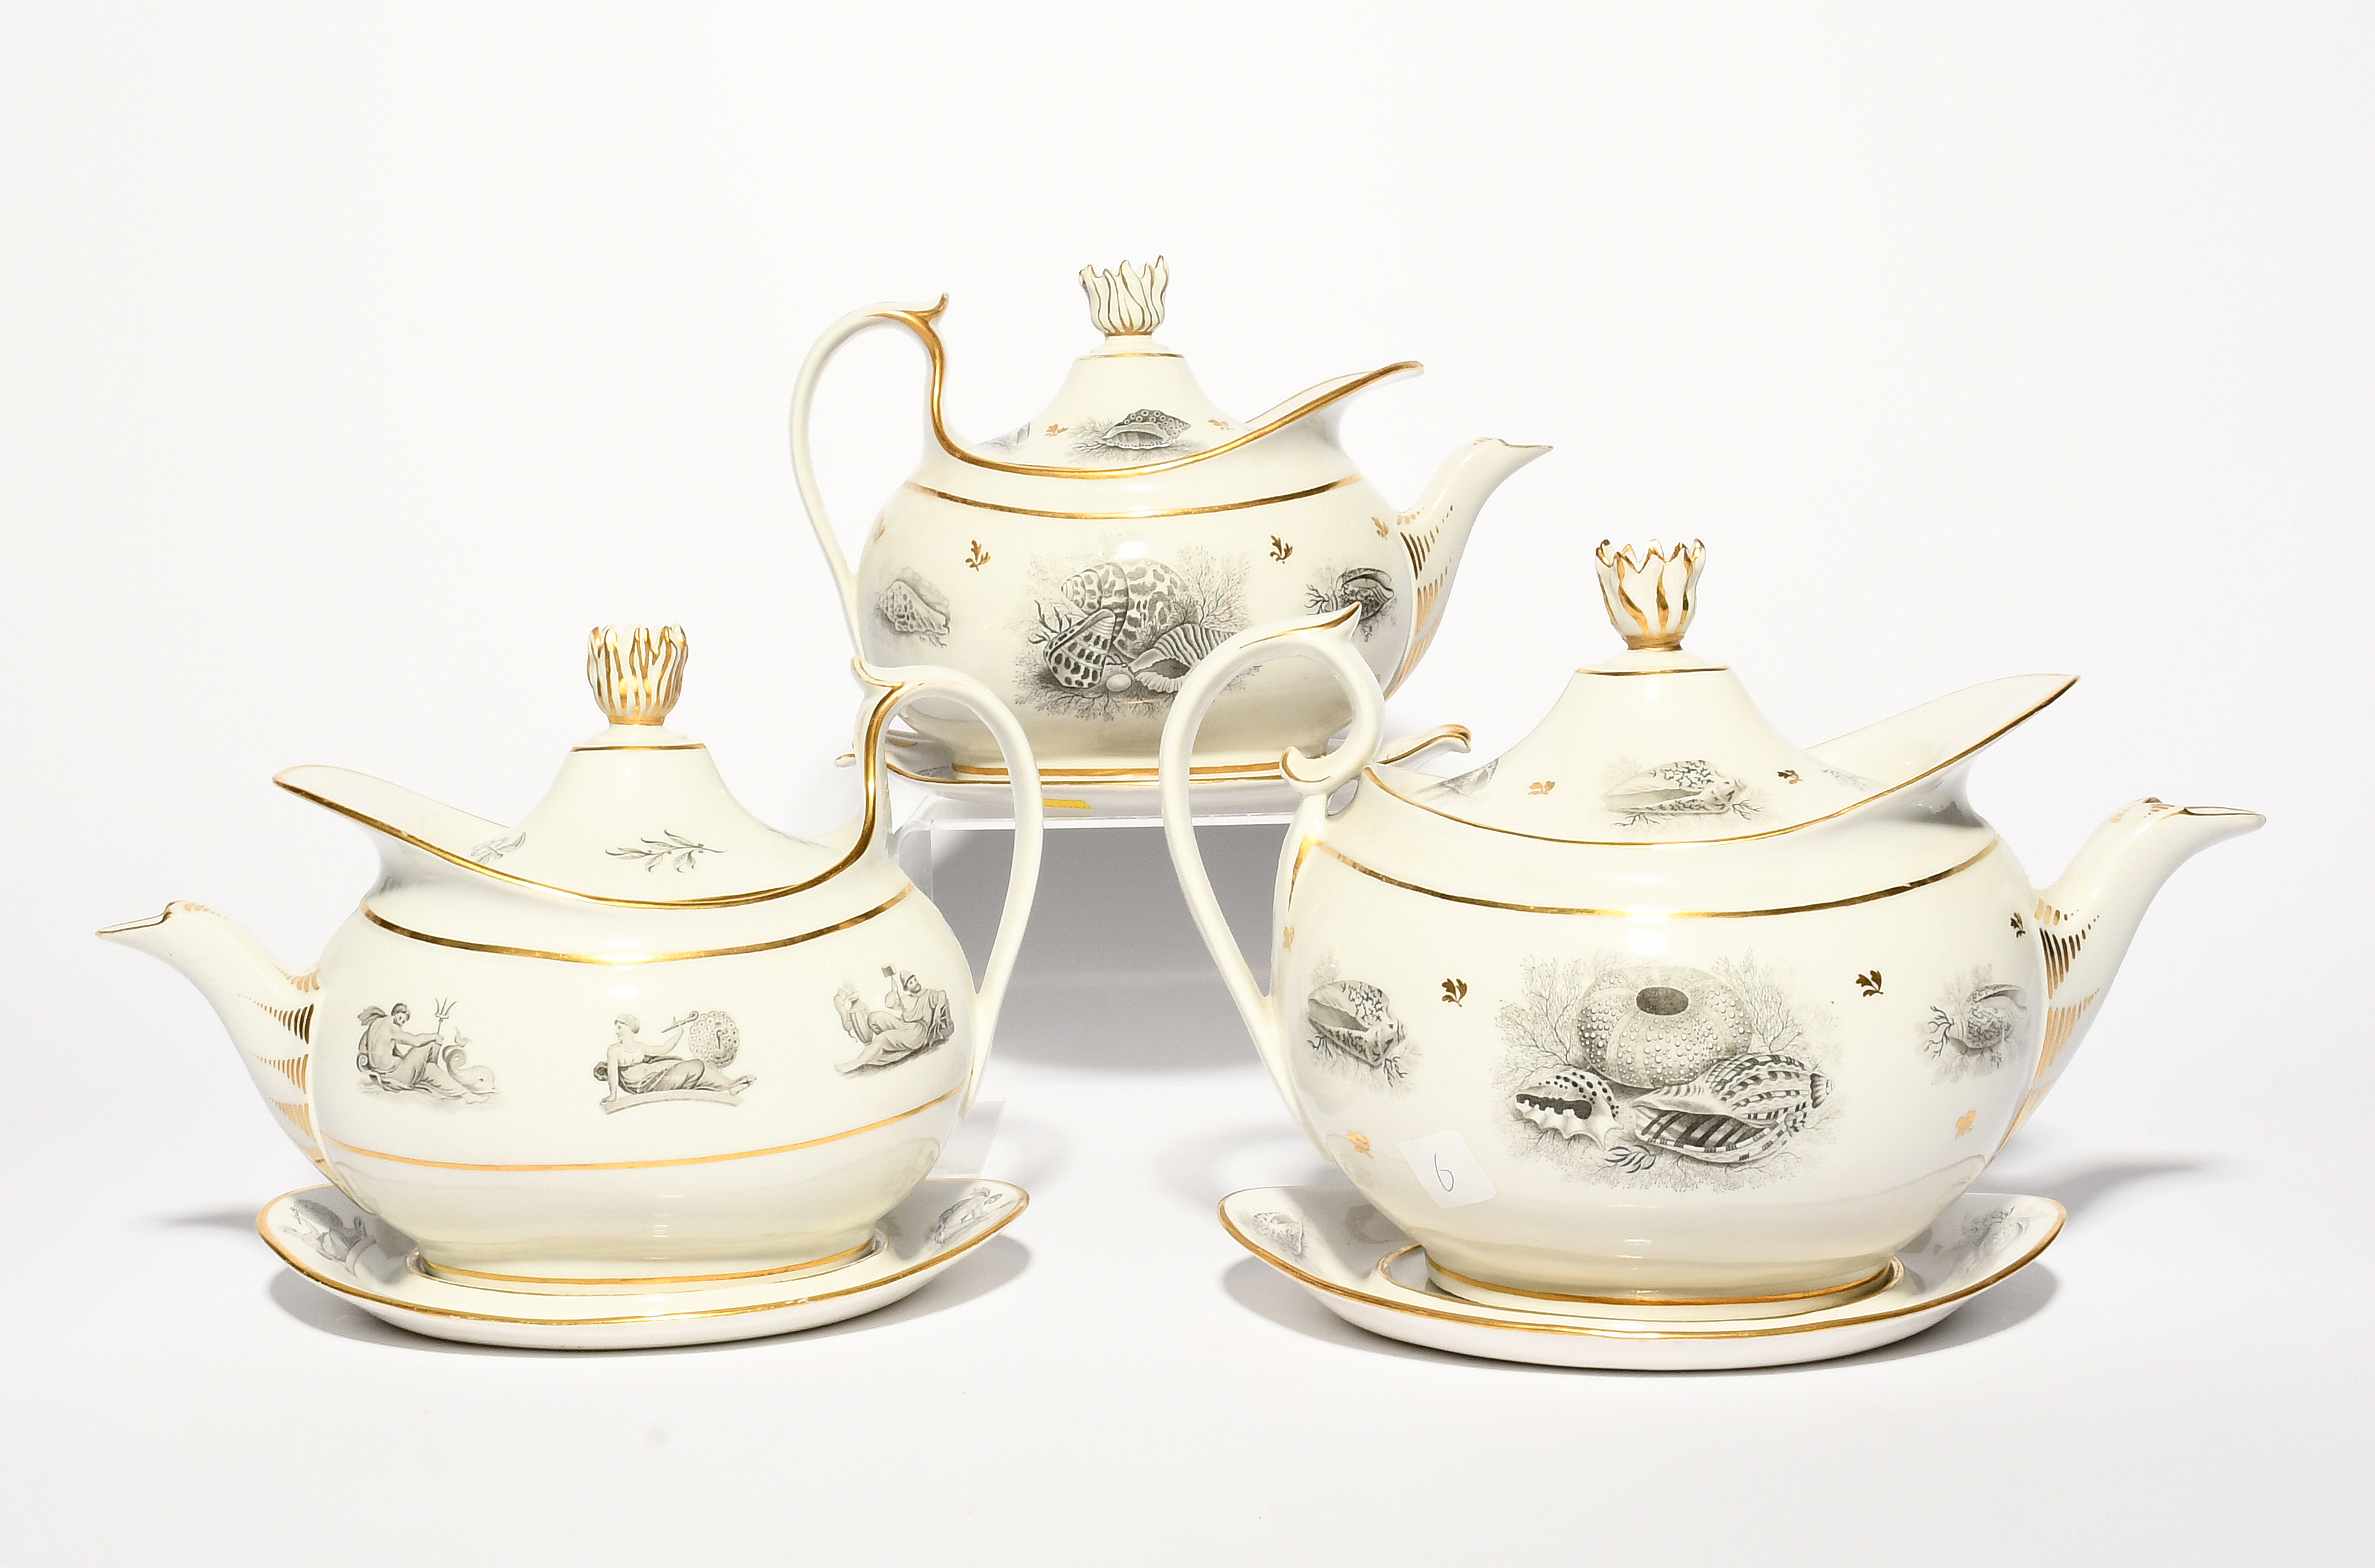 Three Barr Flight and Barr (Worcester) teapots with covers and stands, c.1810, bat printed in black, - Image 4 of 4